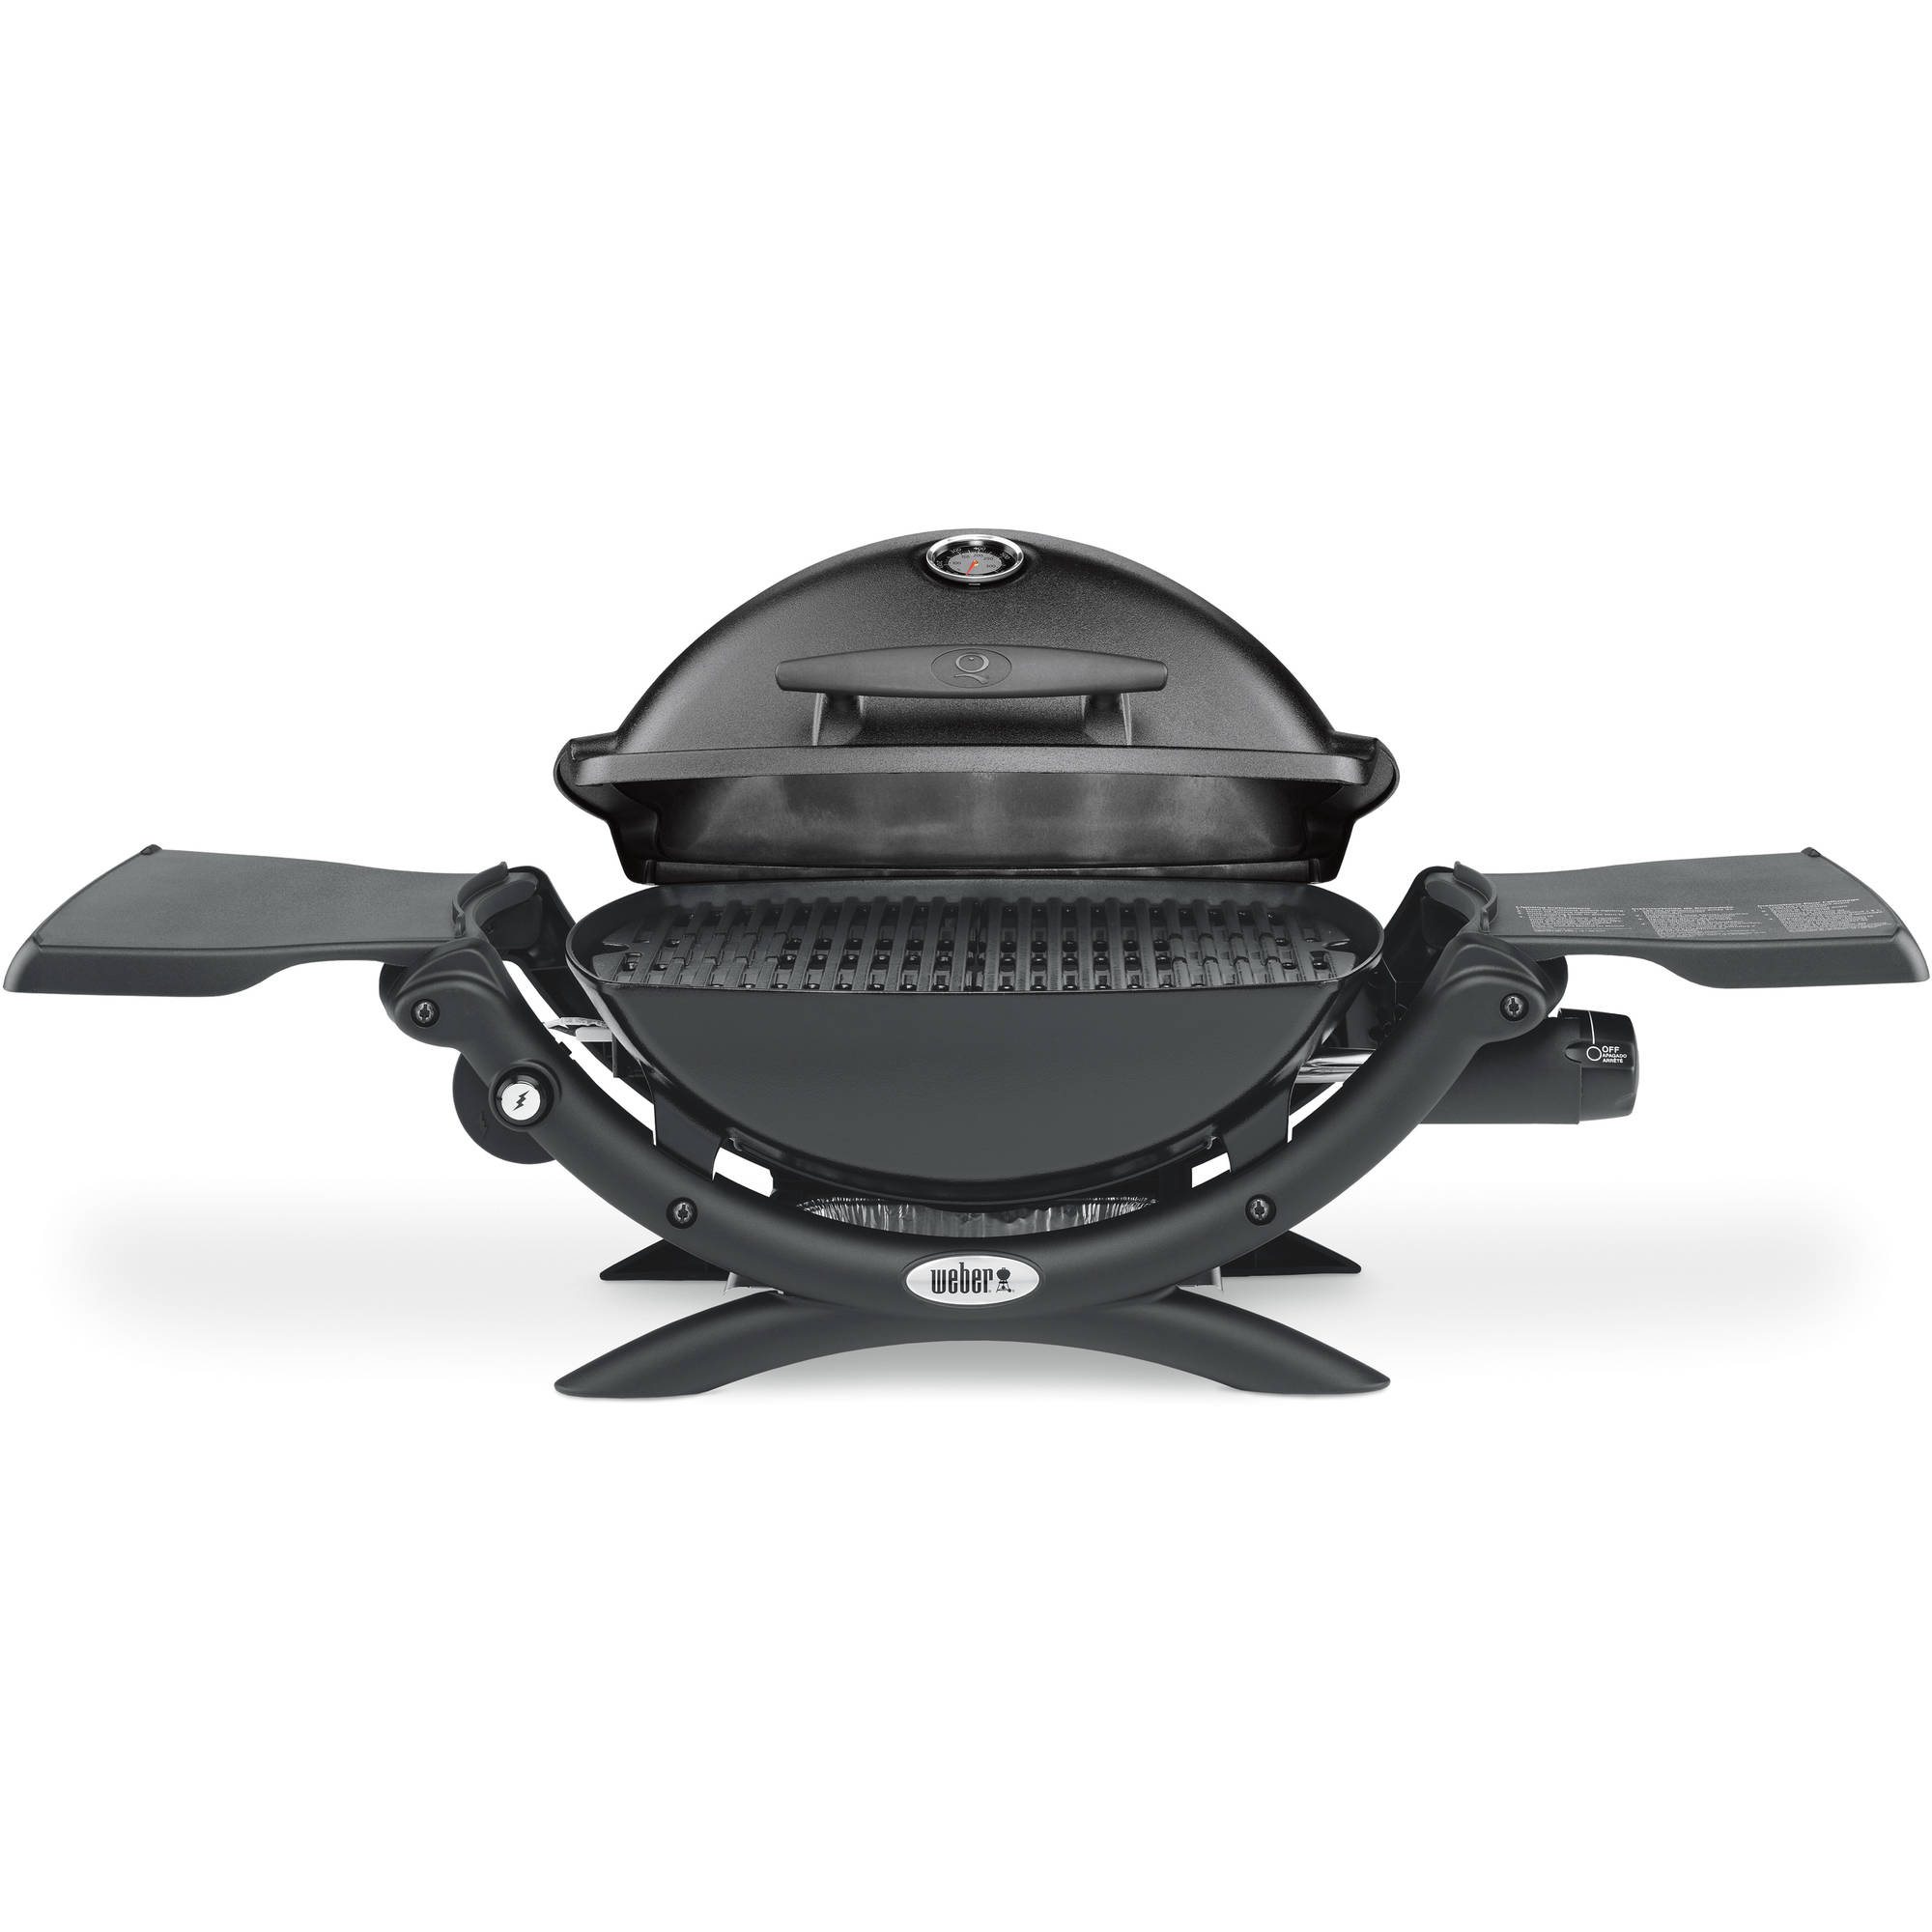 Weber Q 1200 Portable Gas Grill, Black - image 1 of 8